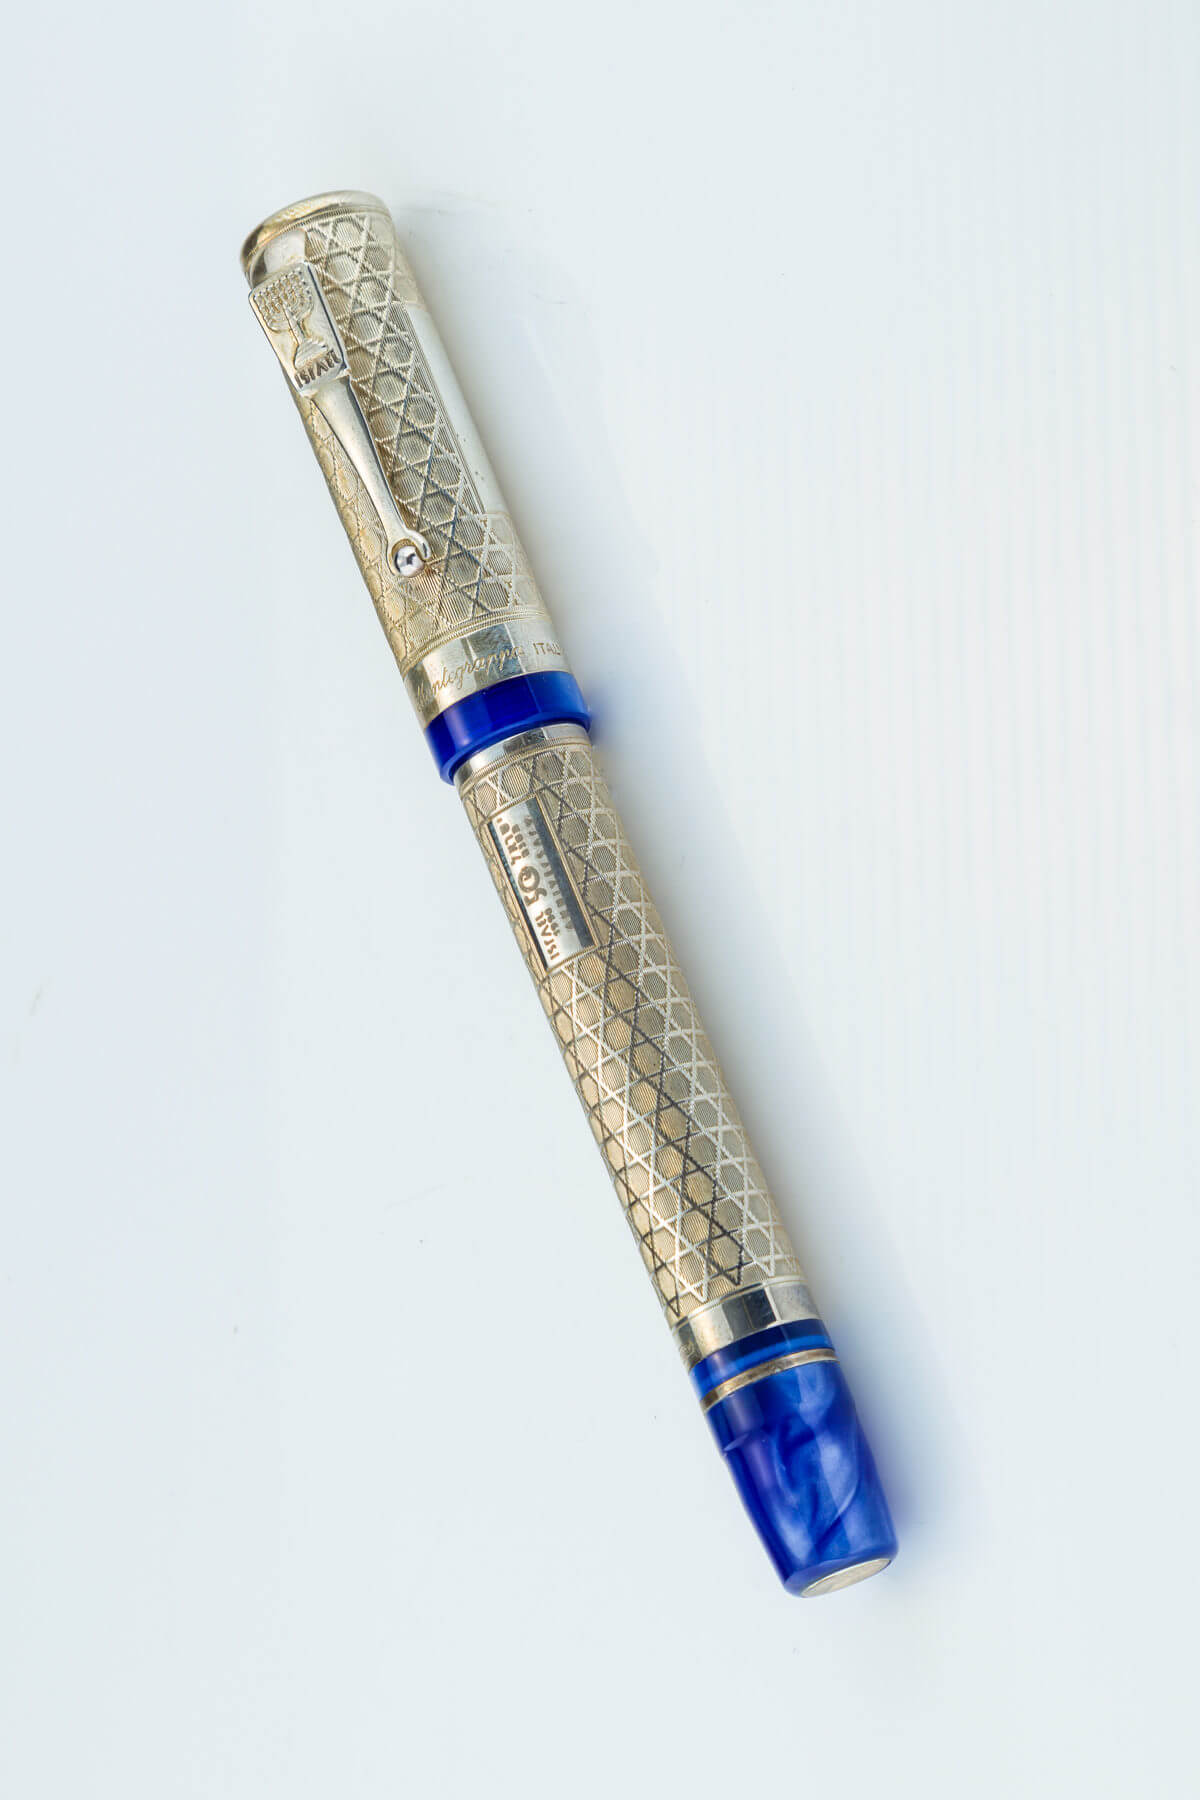 150. A Rare Sterling And Enamel Montegrappa Pen